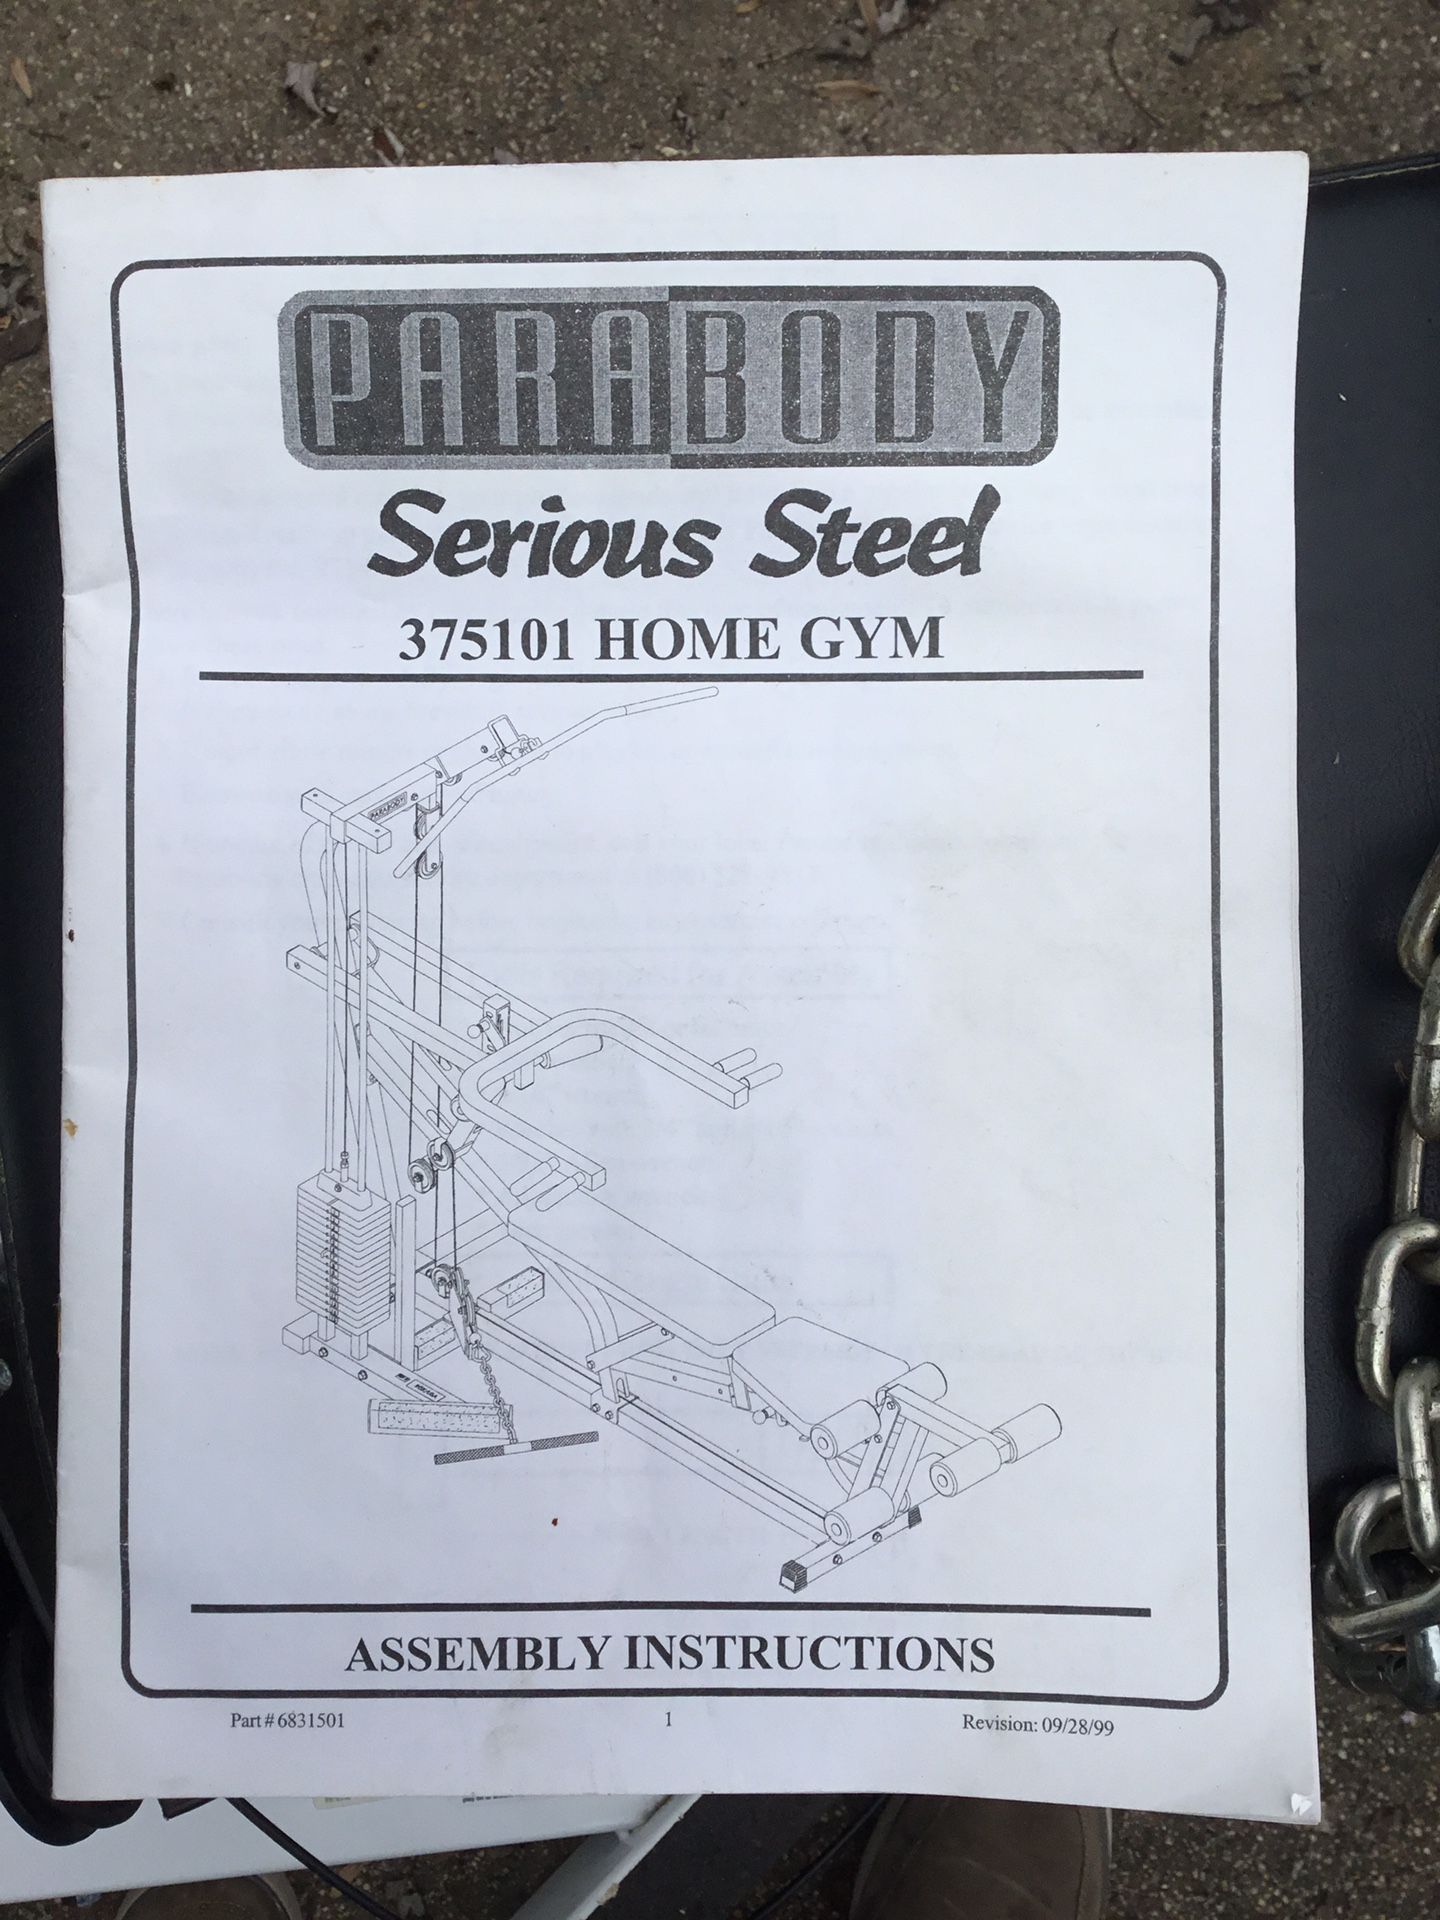 Parabody Serious Steel Home Gym (Make me an offer)